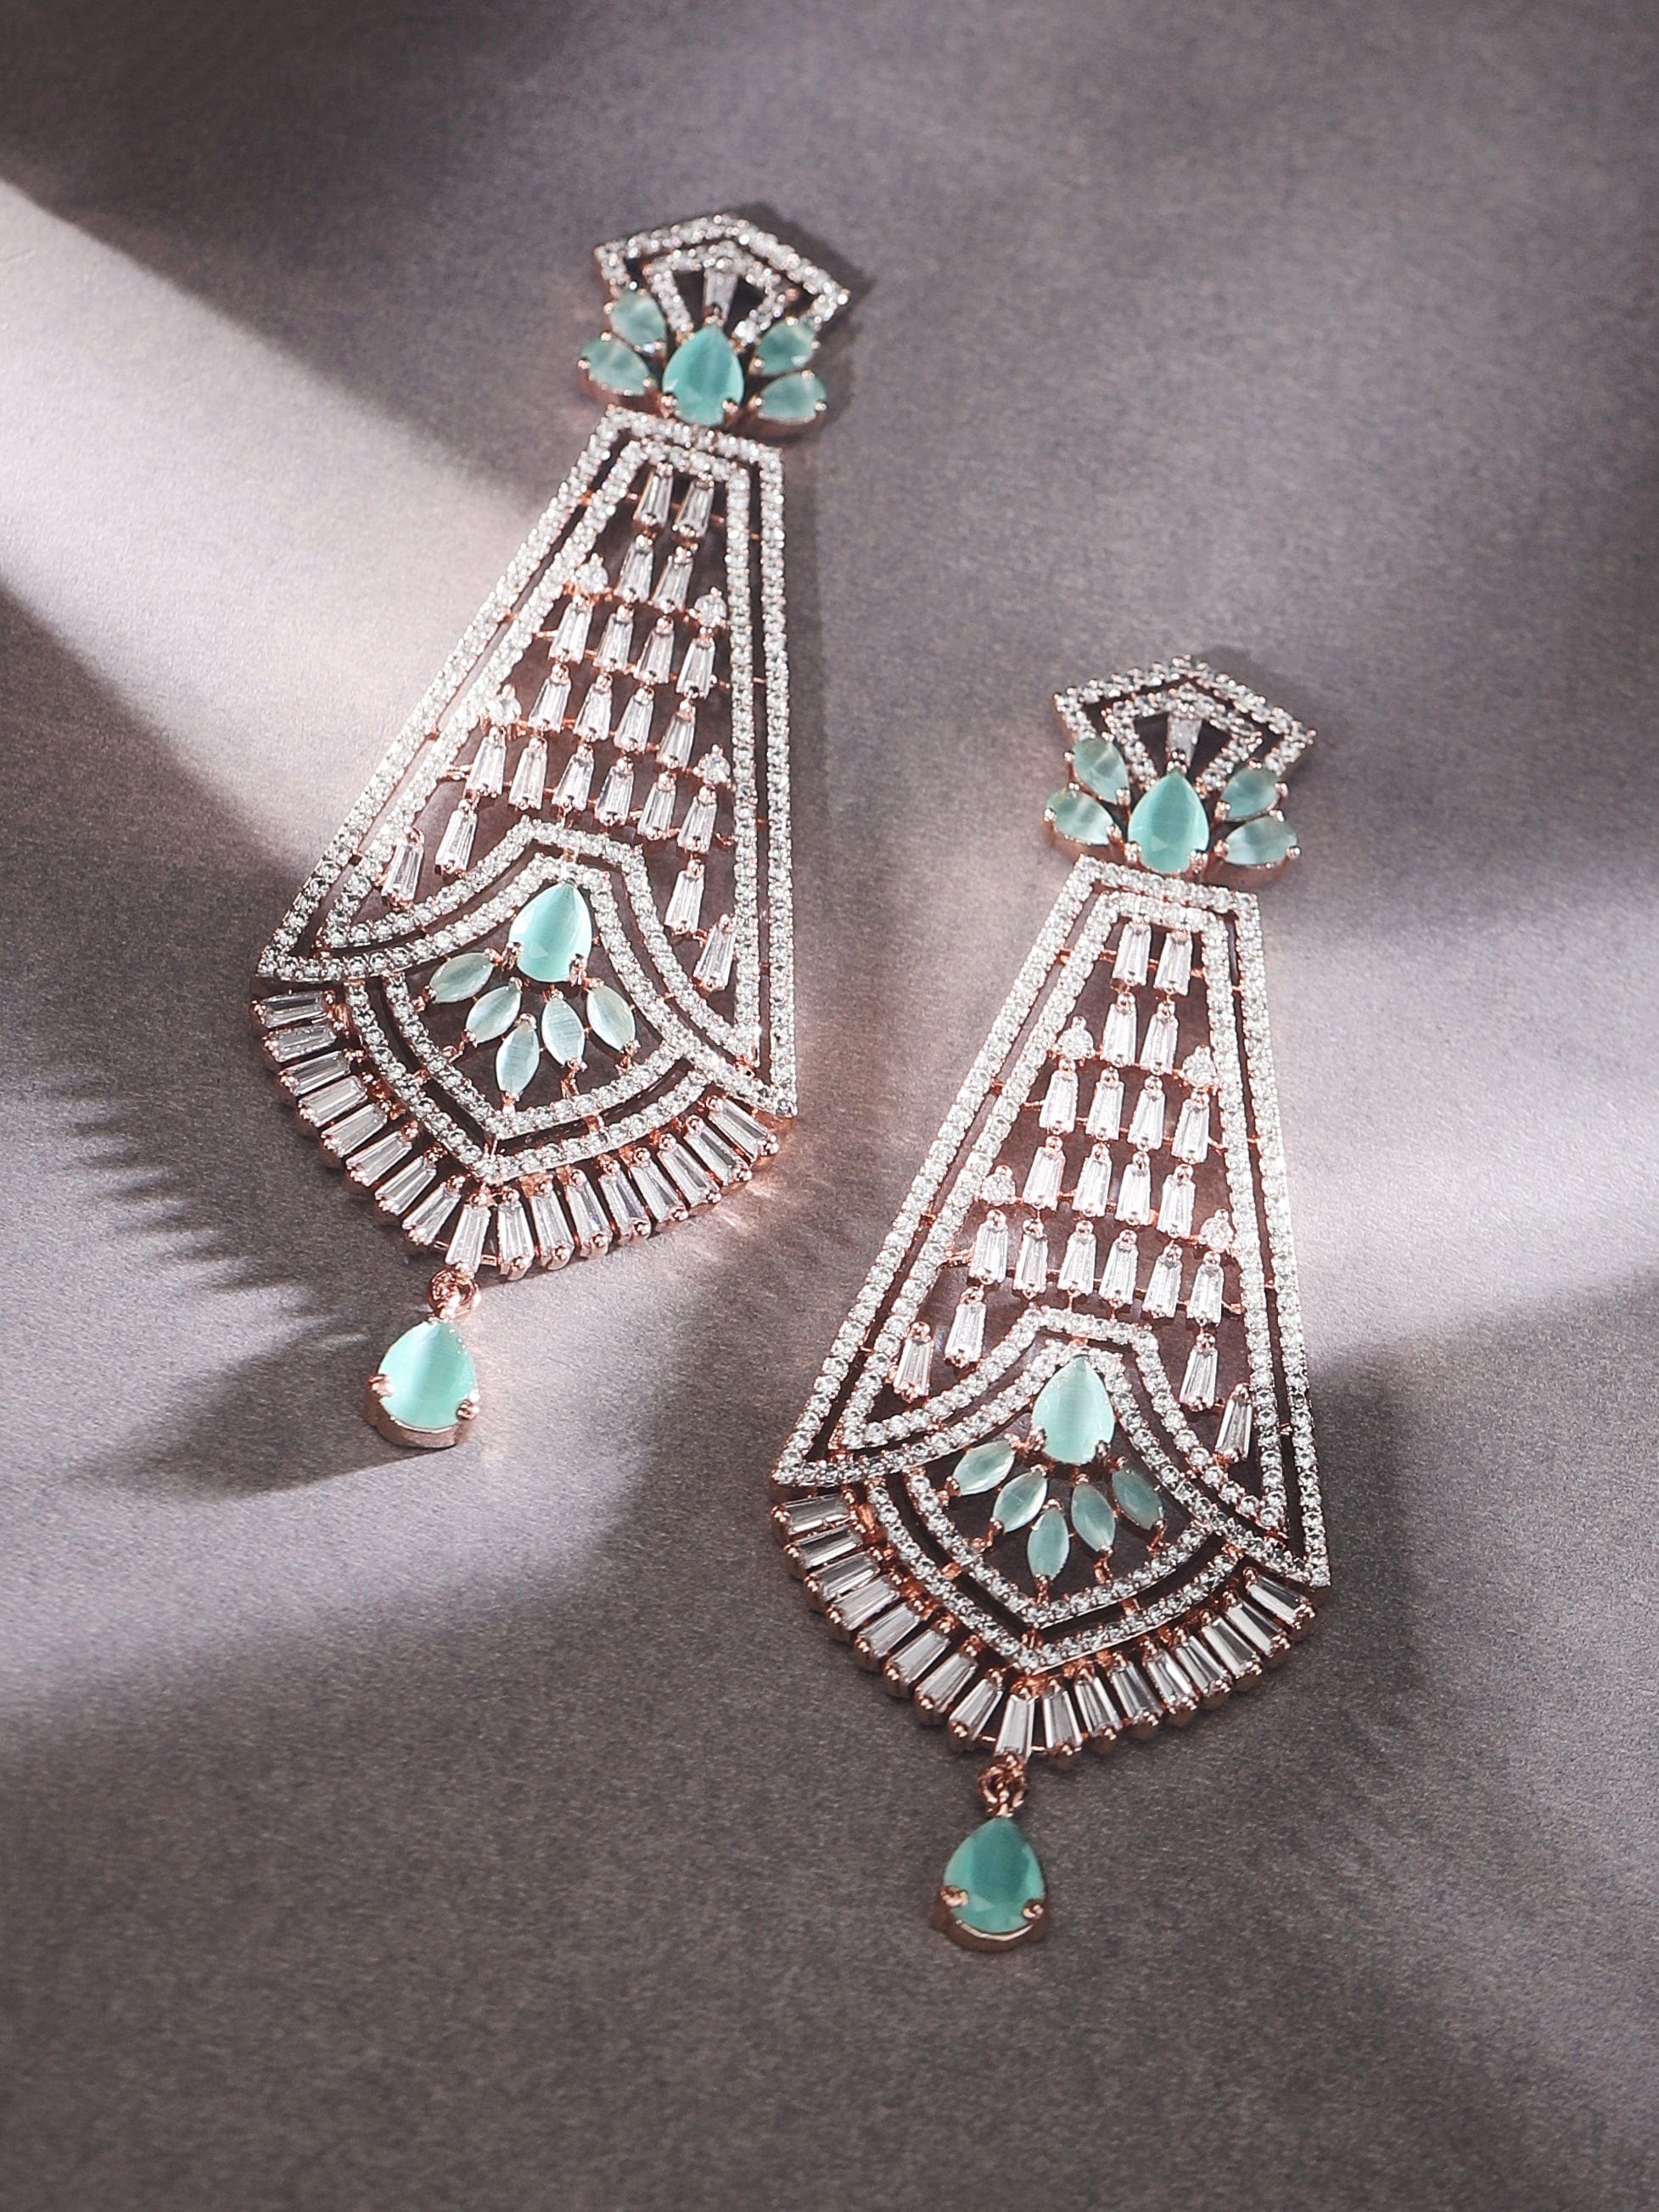 Endtoend Guide on Shopping Diamond Earrings and How to Keep Them Clean  and Dazzled